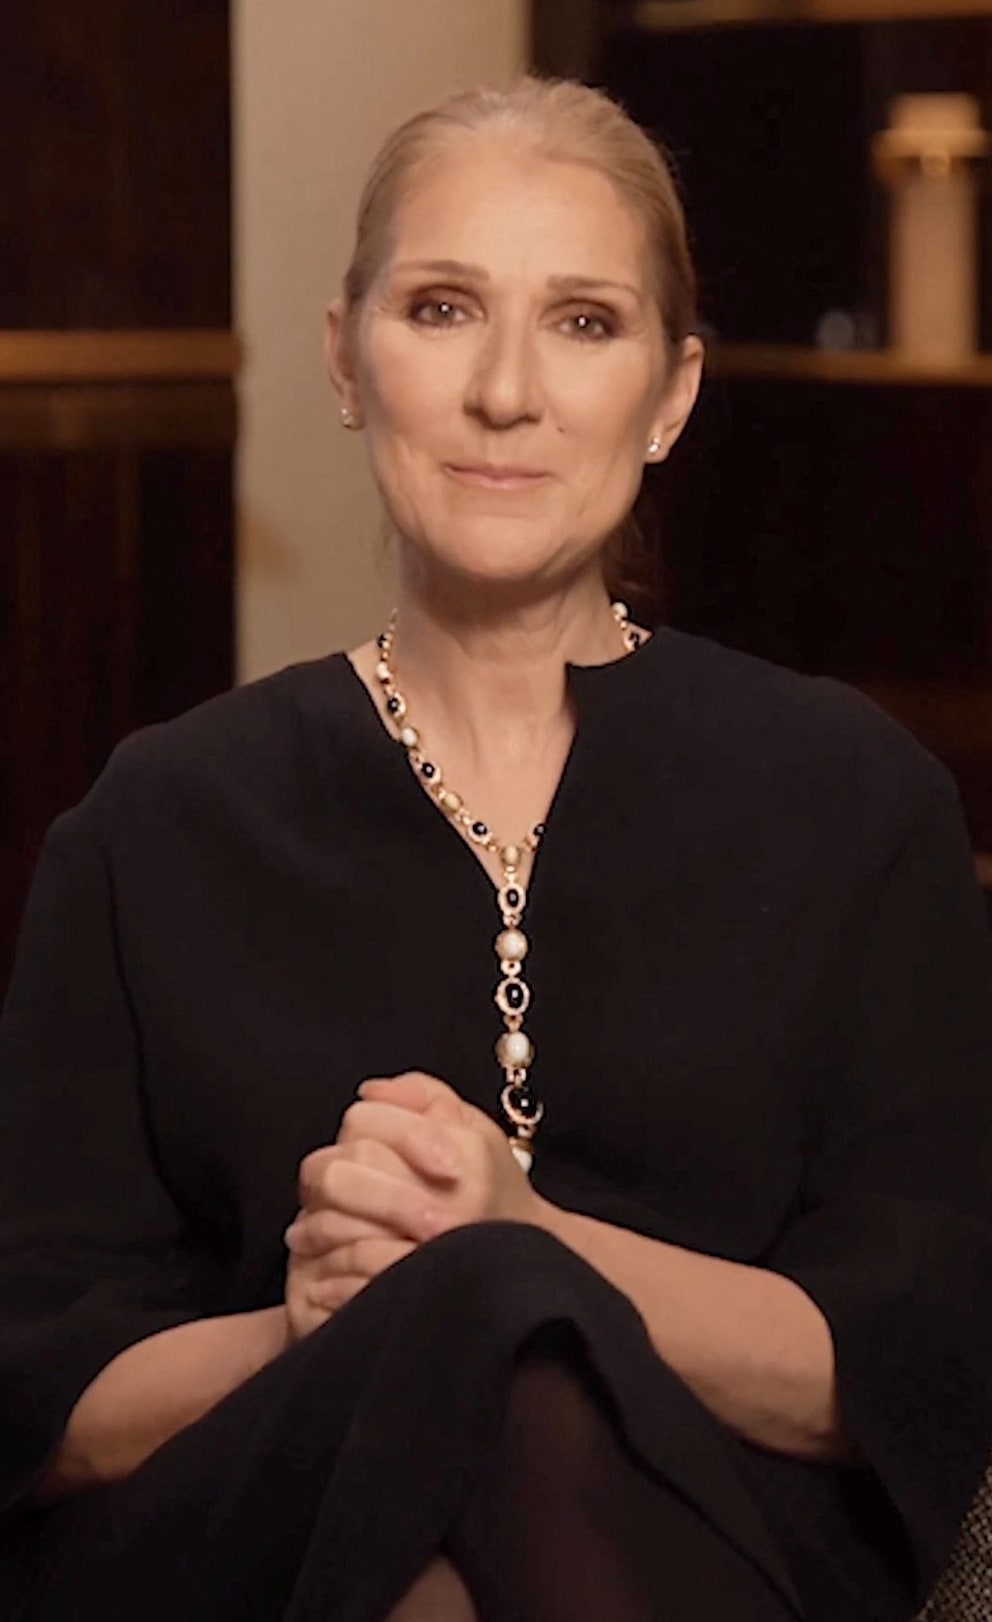 In the video, Celine Dion told her fans a year ago that she was suffering from the disease